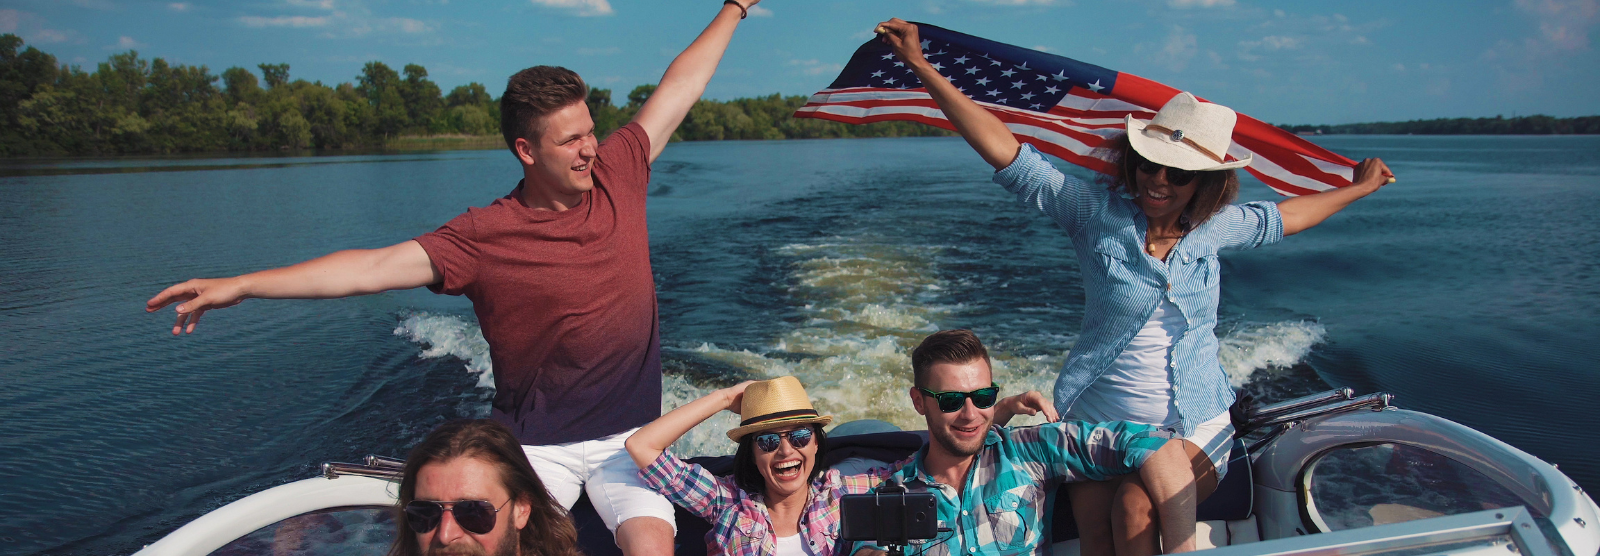 Photo of group of friends on a boat out on a lake. Hanging American flag in the background